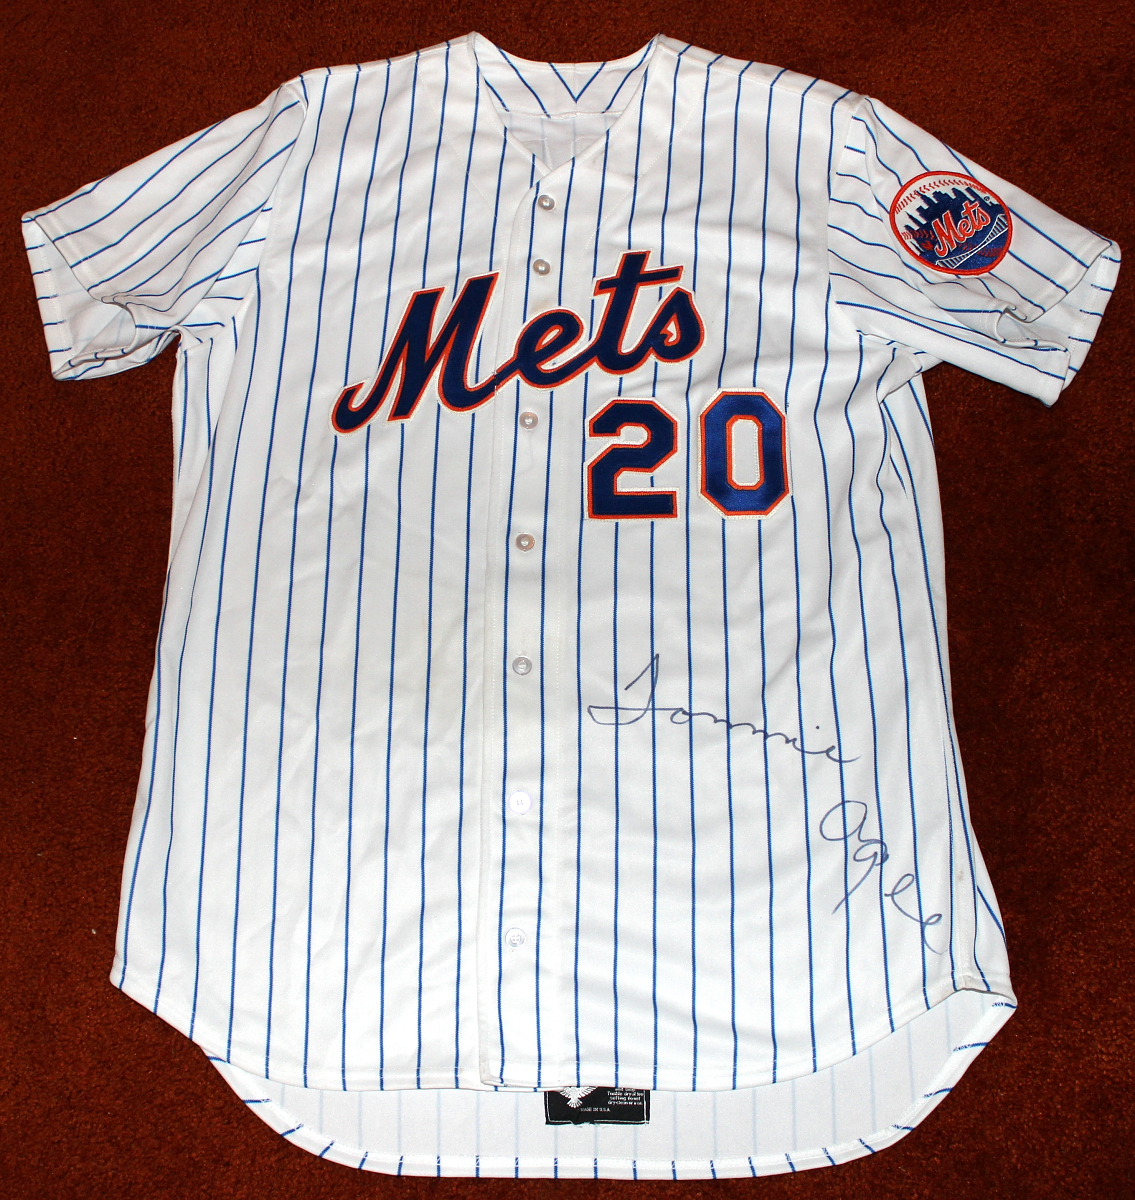 Tommie Agee Autographed NY Mets Jersey - Steeno Sports Memorabilia